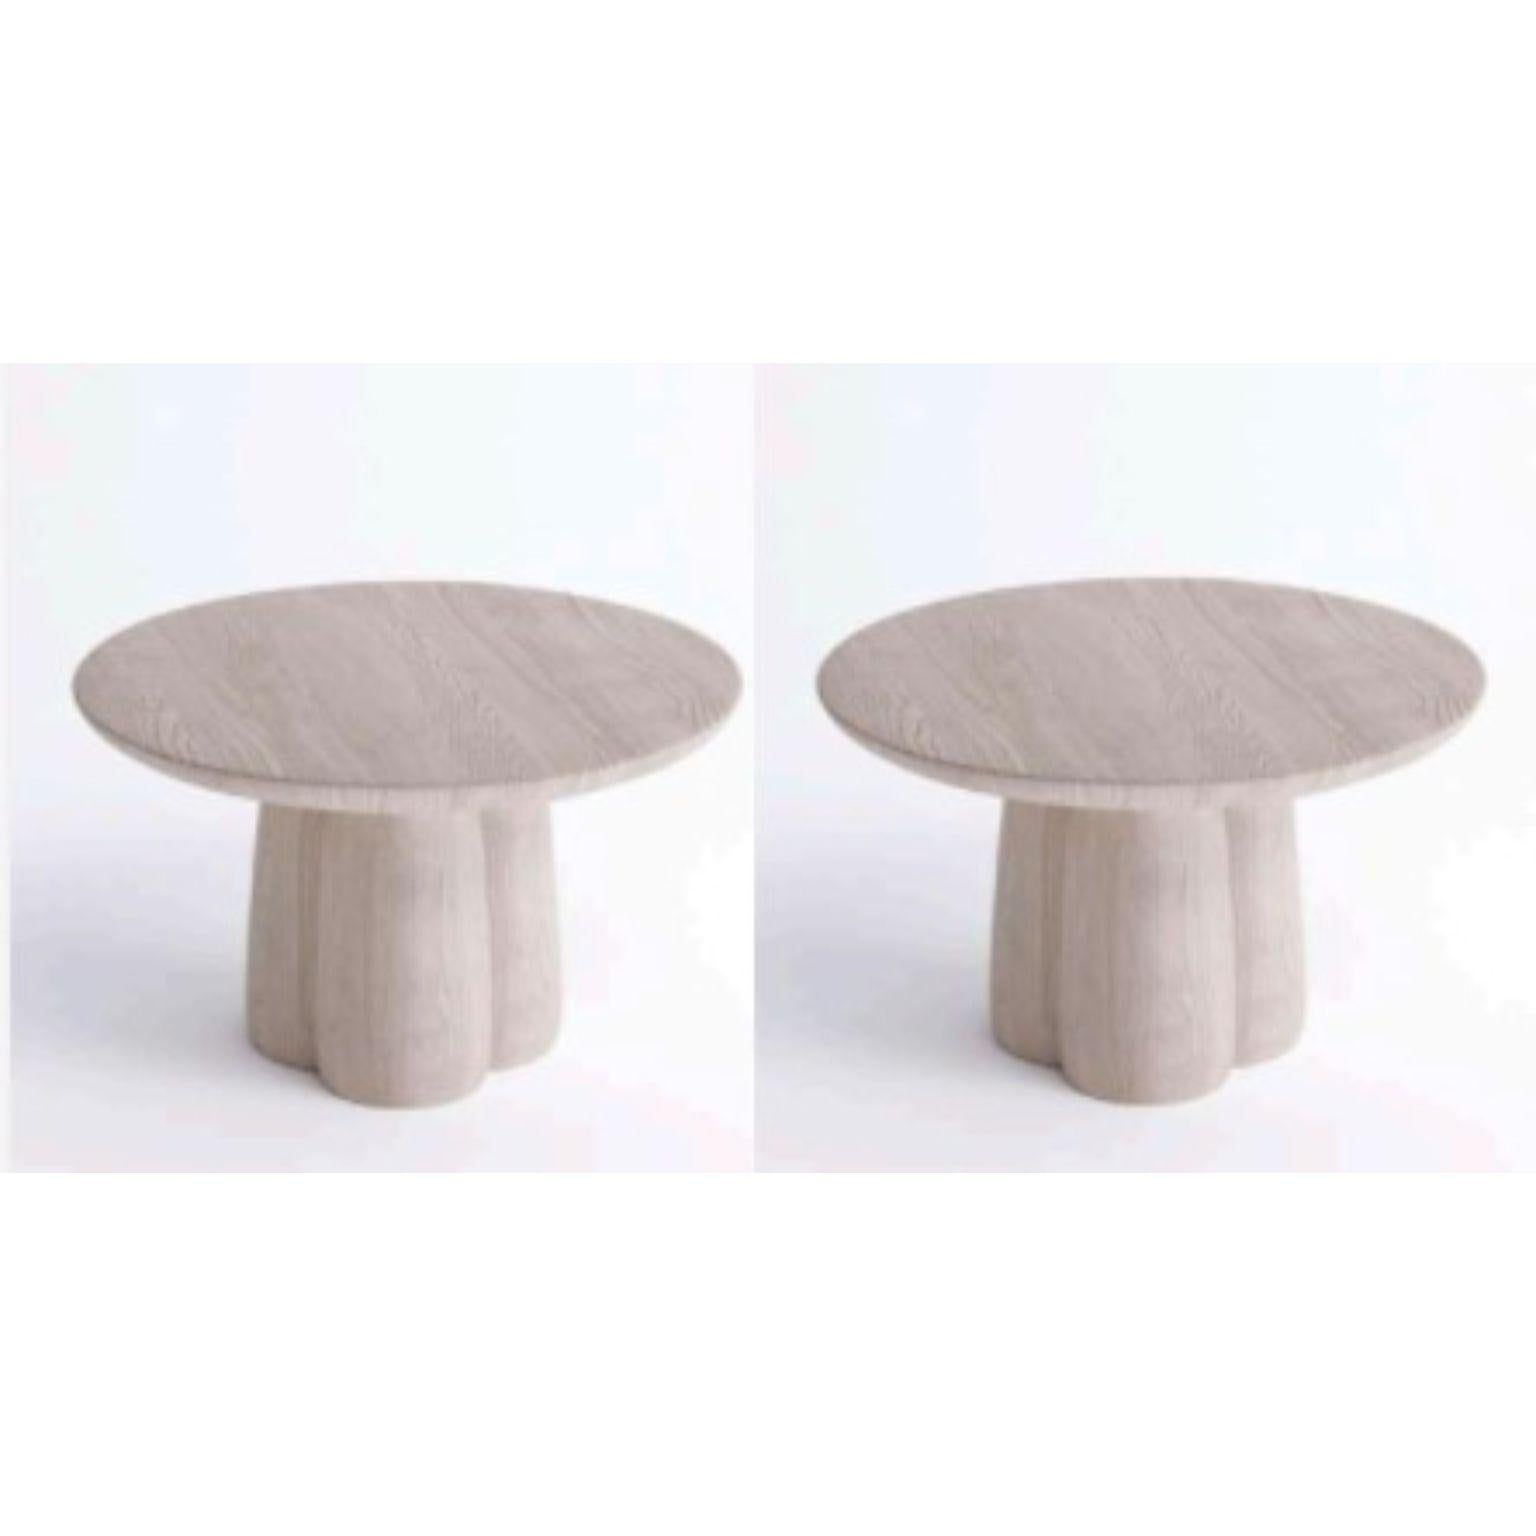 Set of 2 Low coffee tables by Faina
Design: Victoriya Yakusha
Materials: Ash in natural or black color
Dimensions: D 58 x H 35 cm

Like strong sunflower stems, SONIAH tables are fed with energy from the ground, saturating with it the space